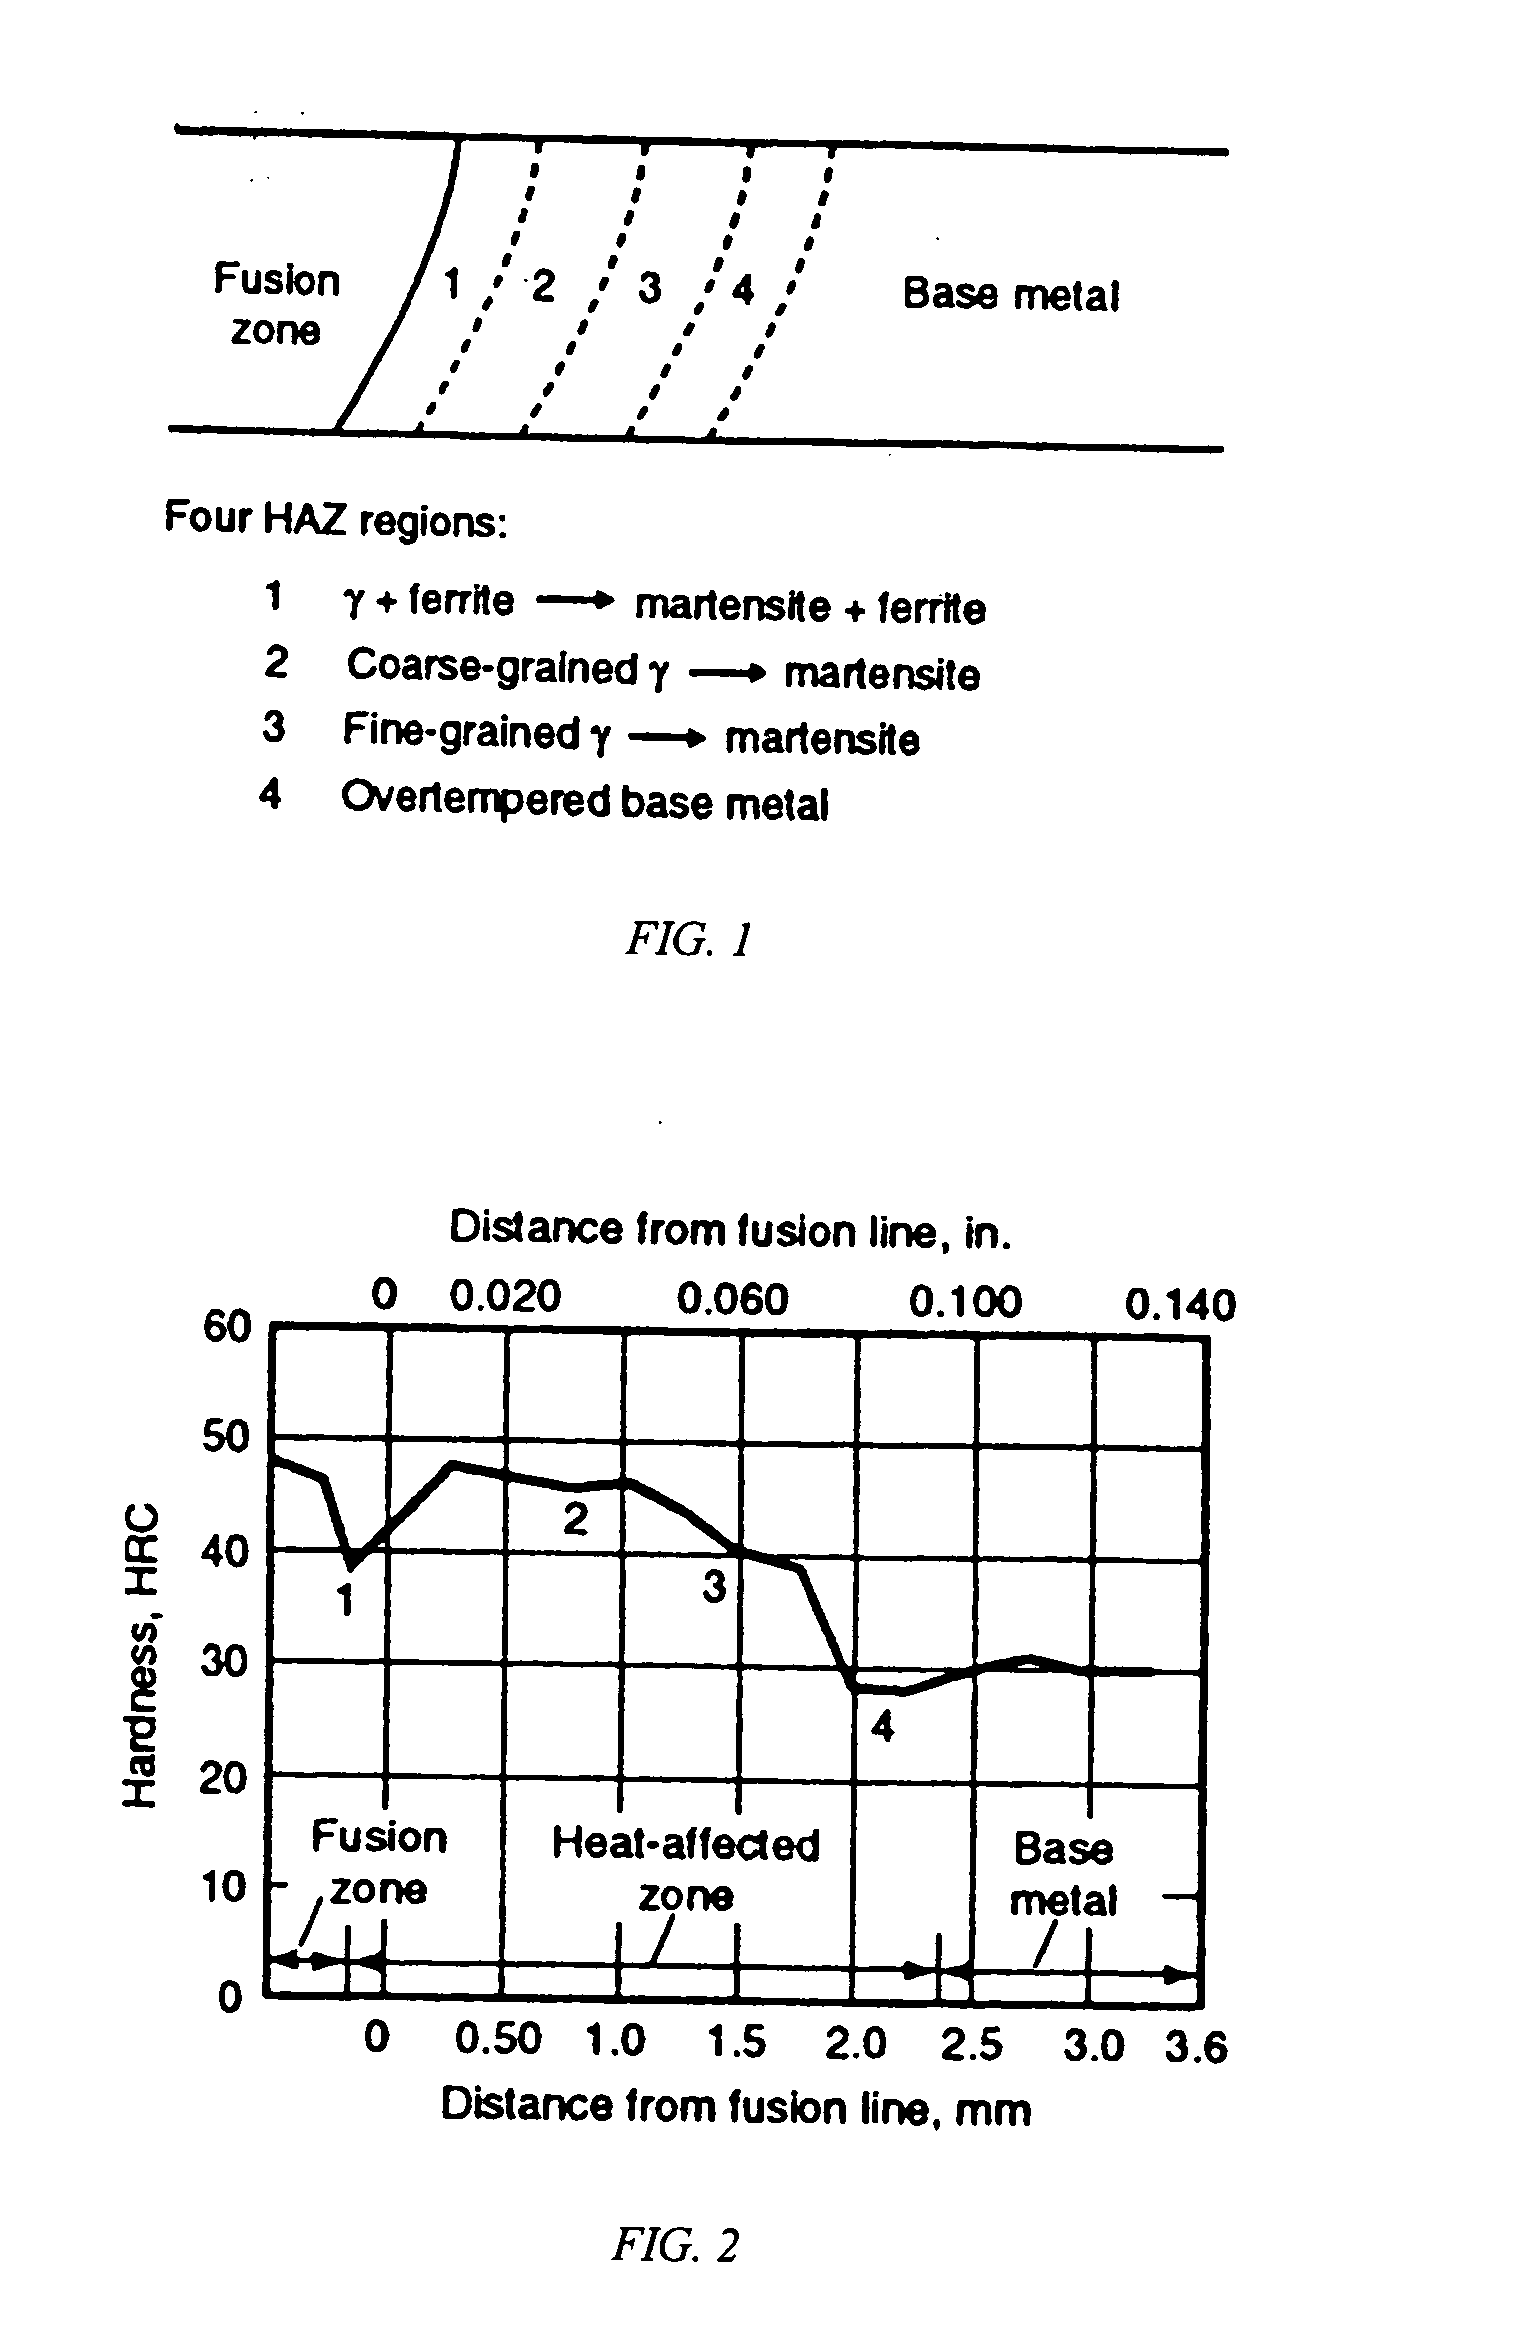 Method for improving the performance of seam-welded joints using post-weld heat treatment